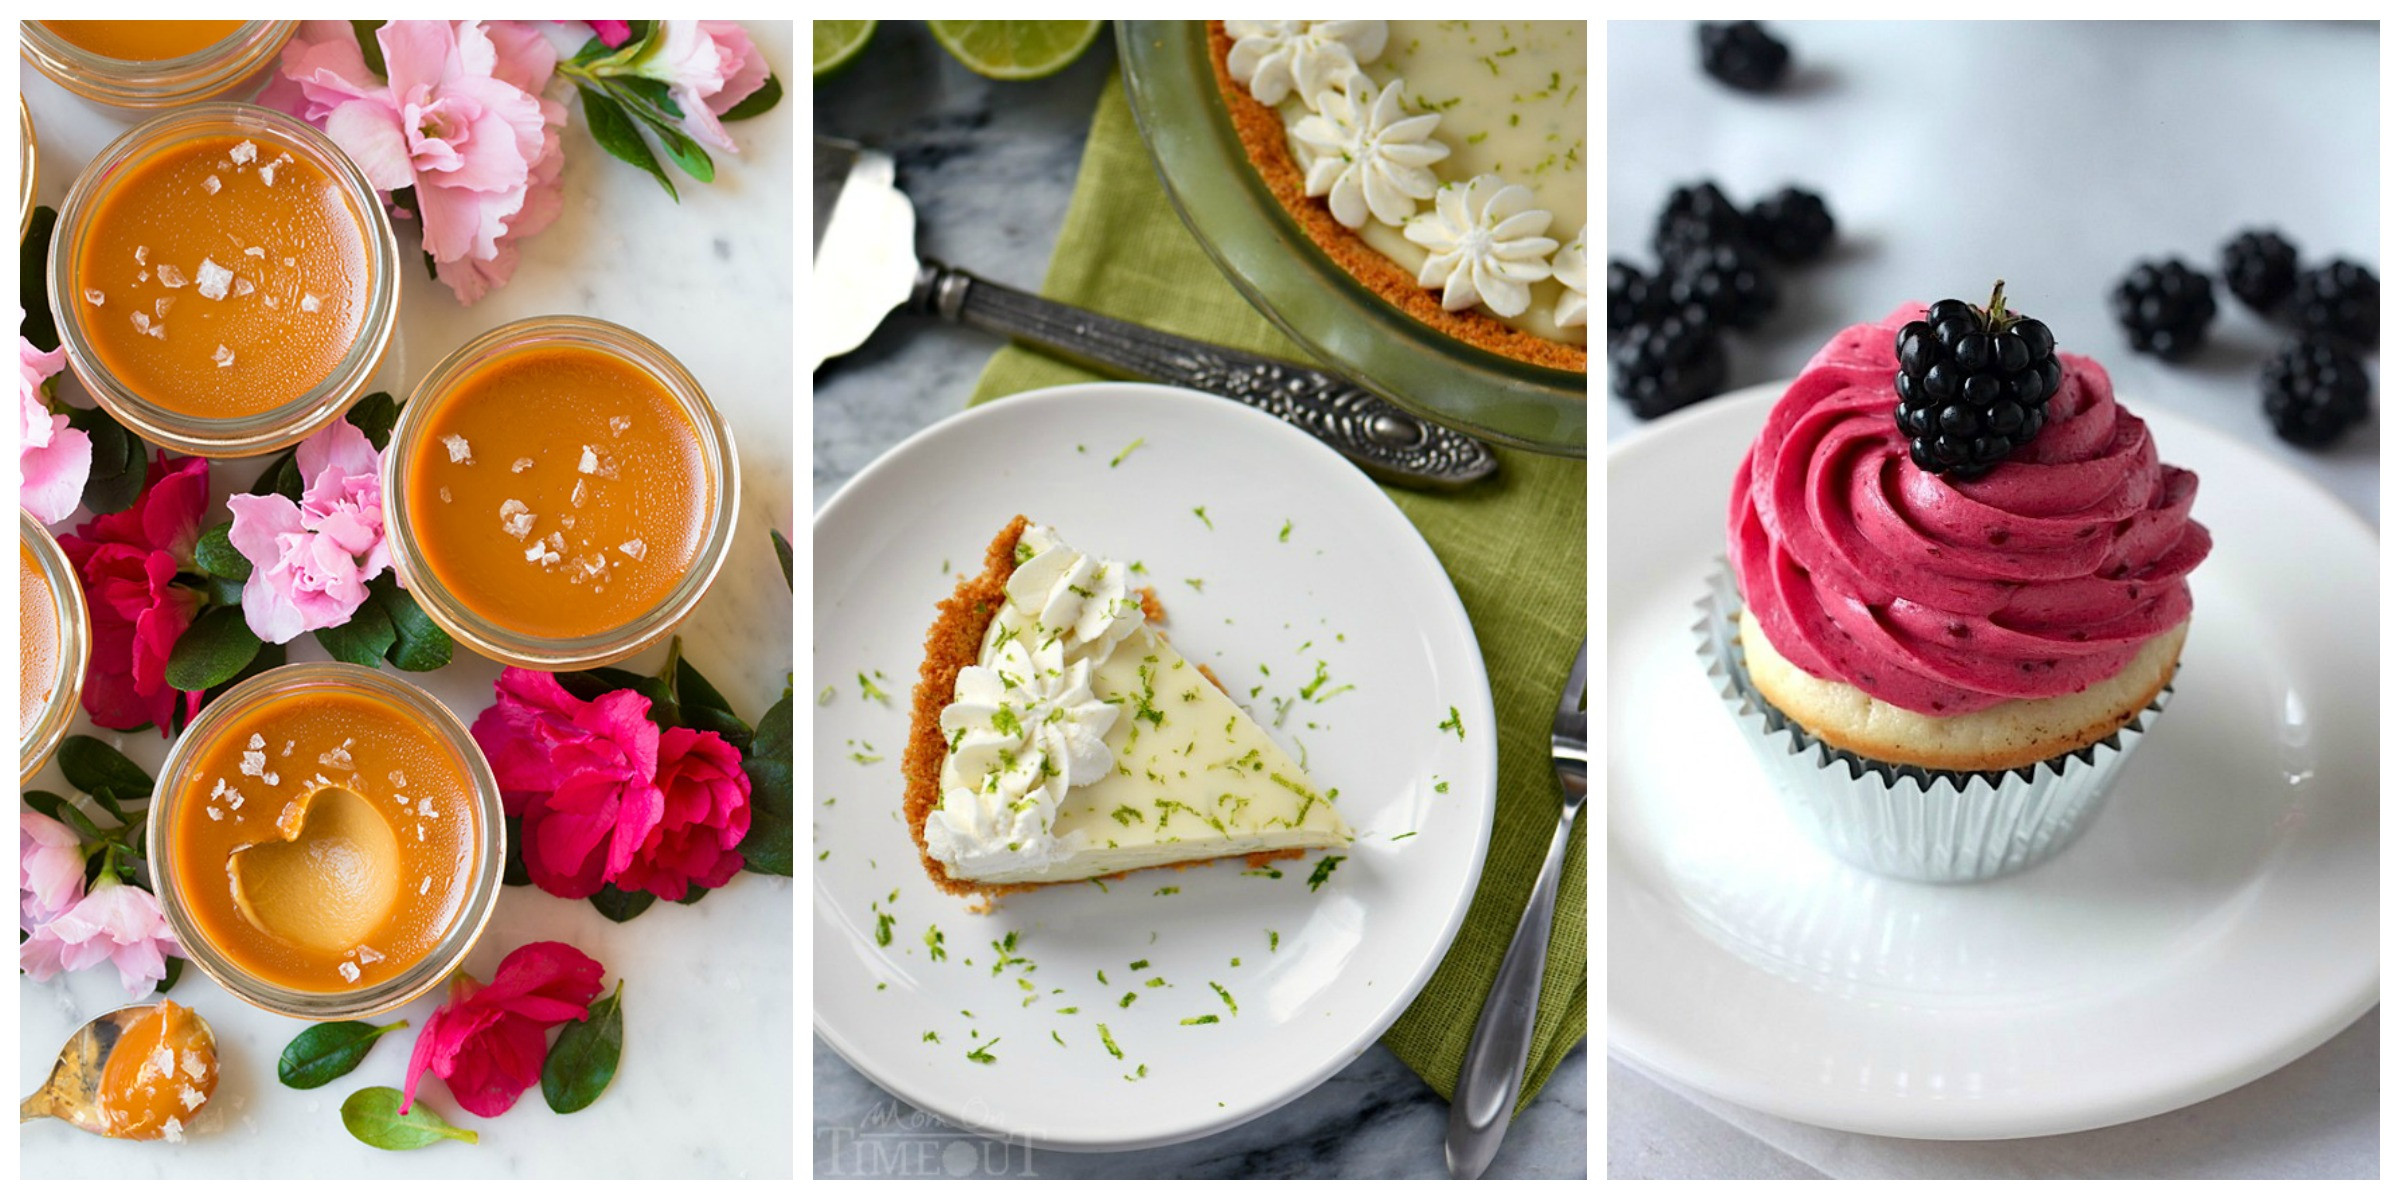 Mothers Day Dessert
 25 Mother s Day Desserts Recipes & Ideas for Delicious